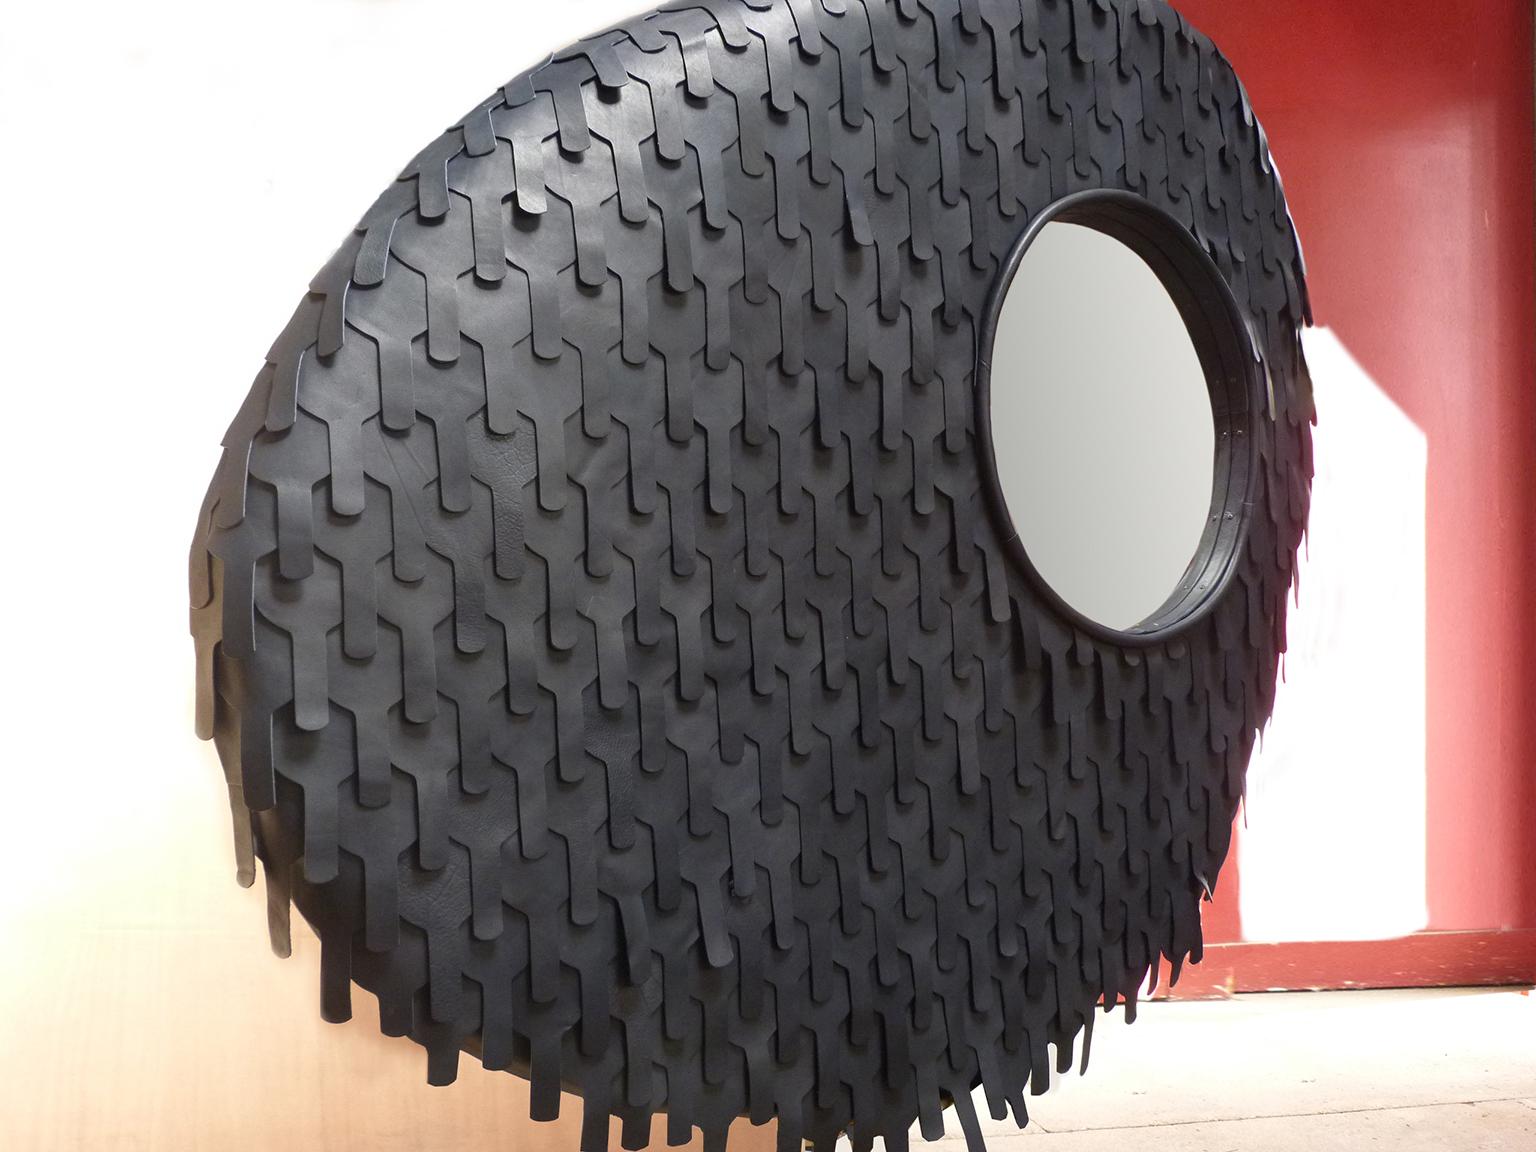 Organic modern artist creation one of a kind carved mirror, dressed in leather. Color: Black 
acrylic resin structure.
Measures: heigh 115cm/42.27i x width 130cm/51.18i. And depth 12 and 5 cm.